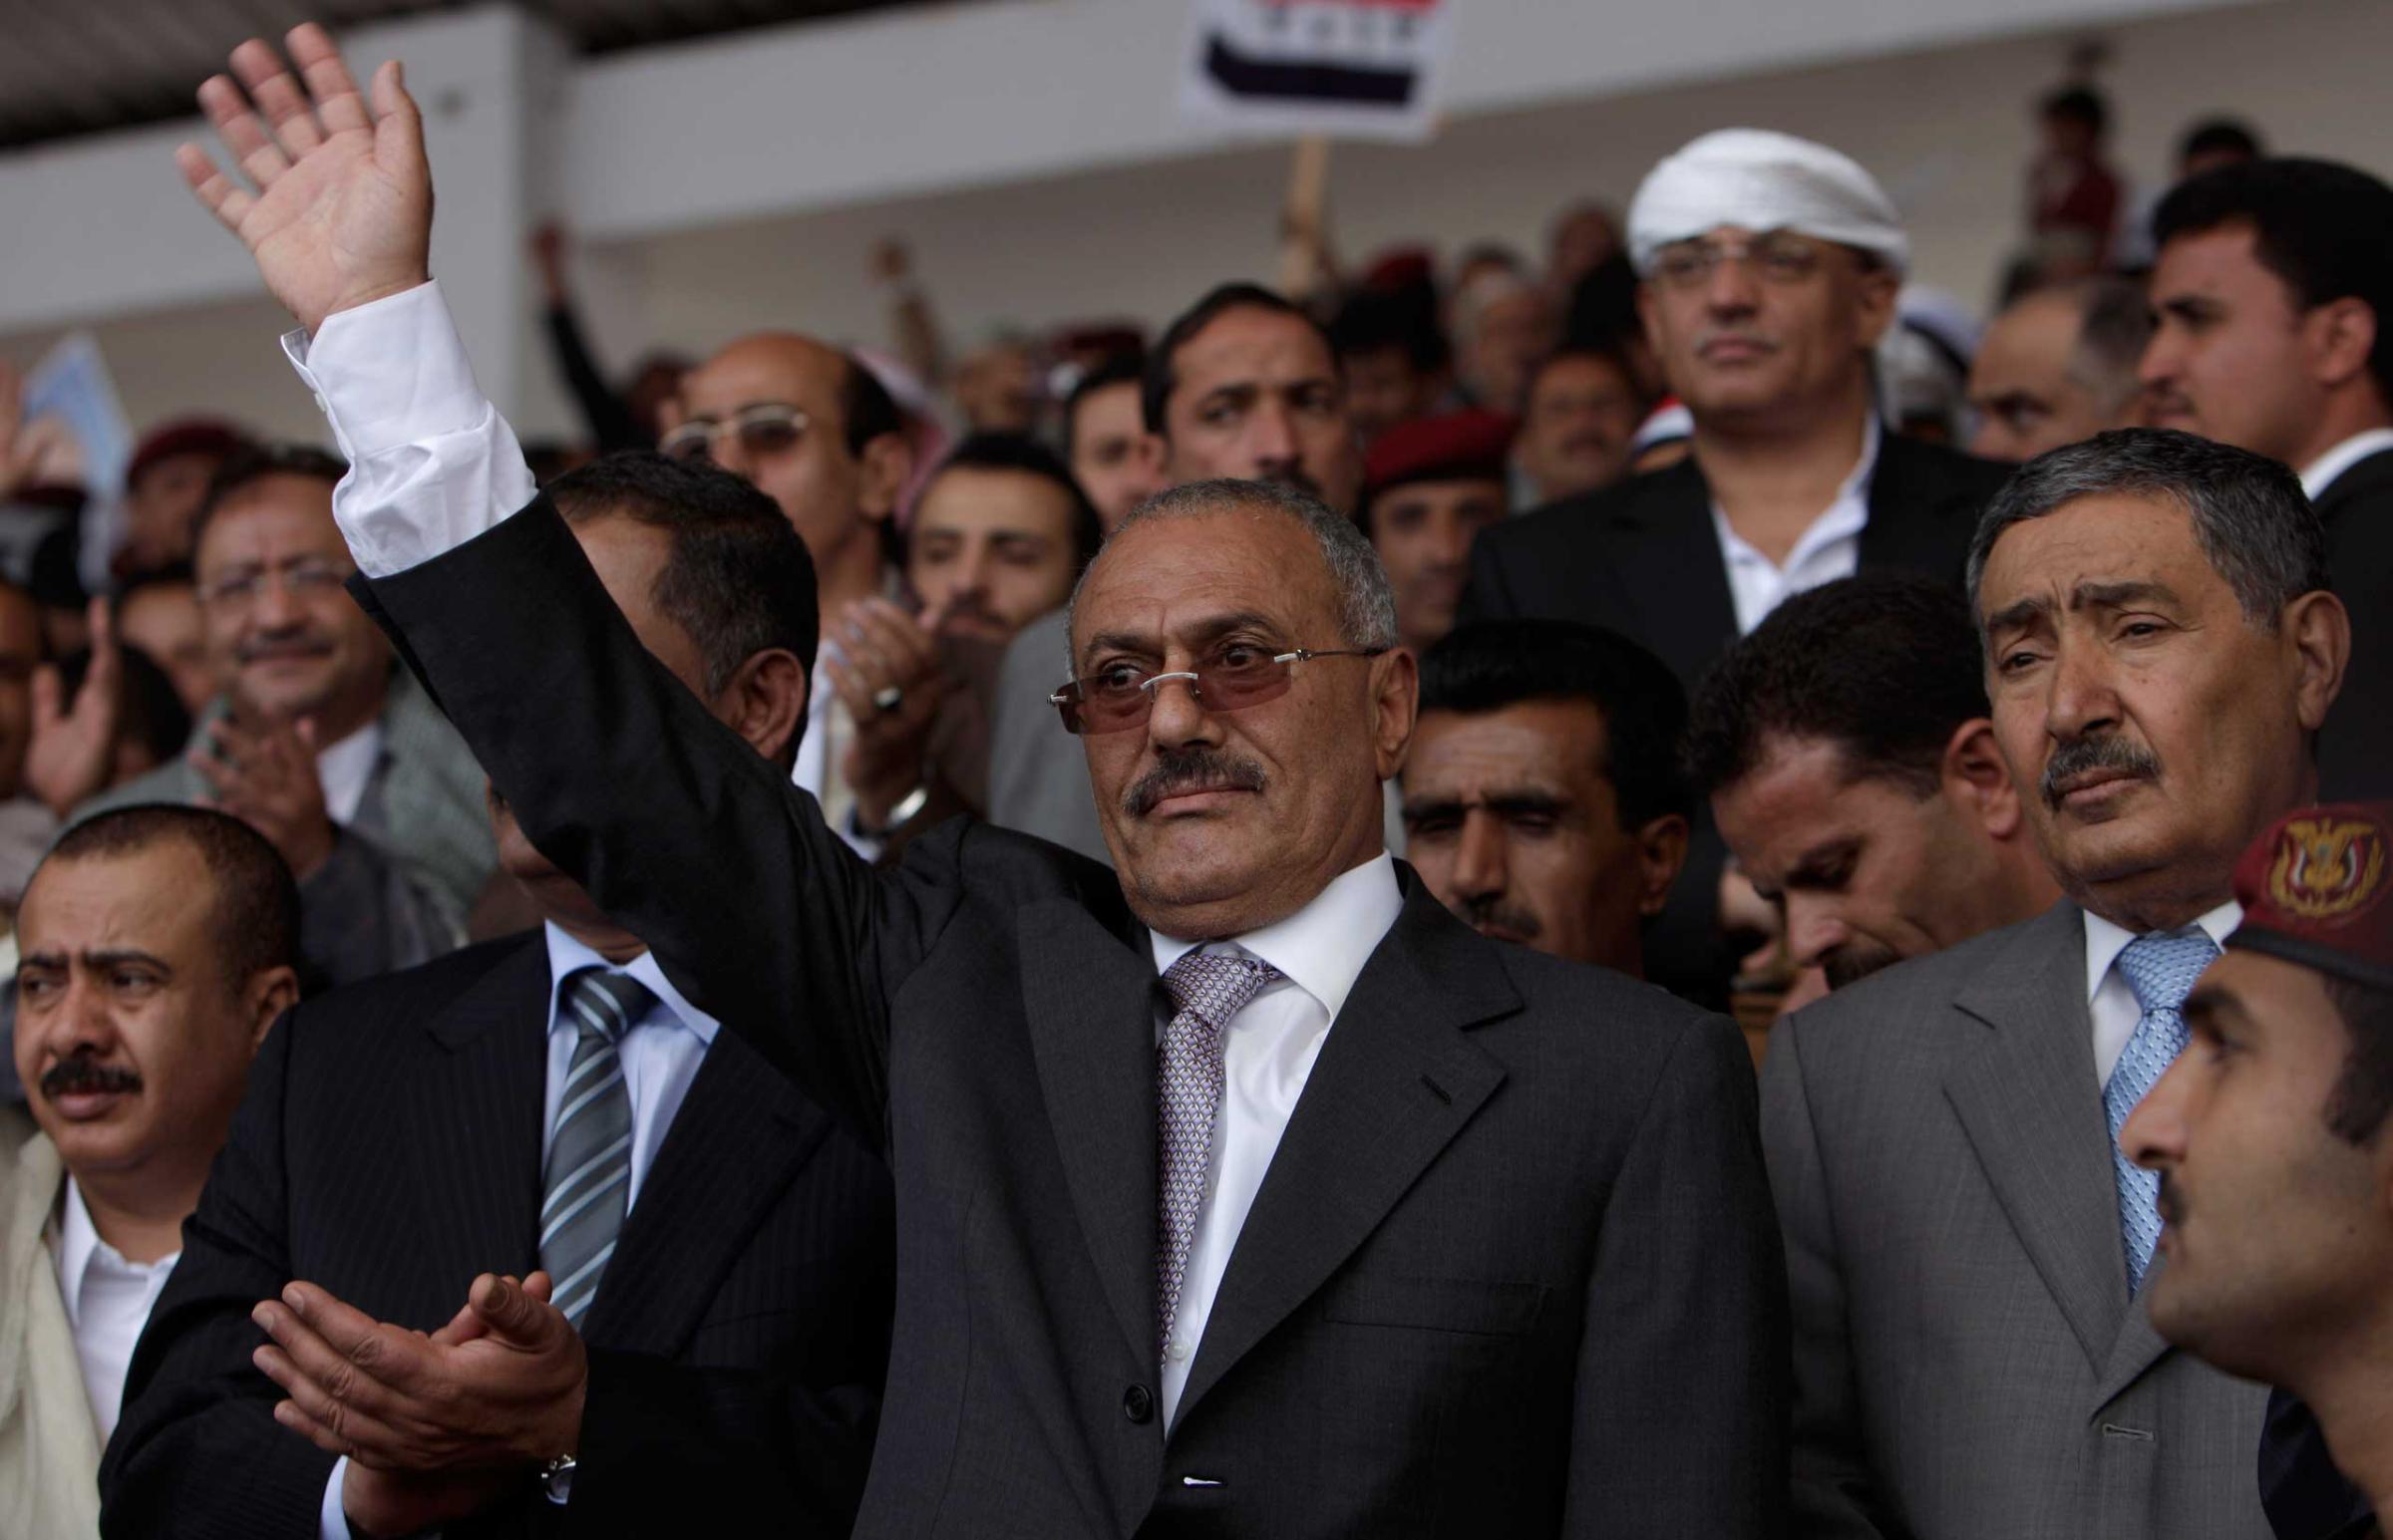 A blast at the presidential compound badly burns President Ali Abdullah Saleh. Saleh travels to Saudi Arabia for treatment, but ultimately returns to his post.